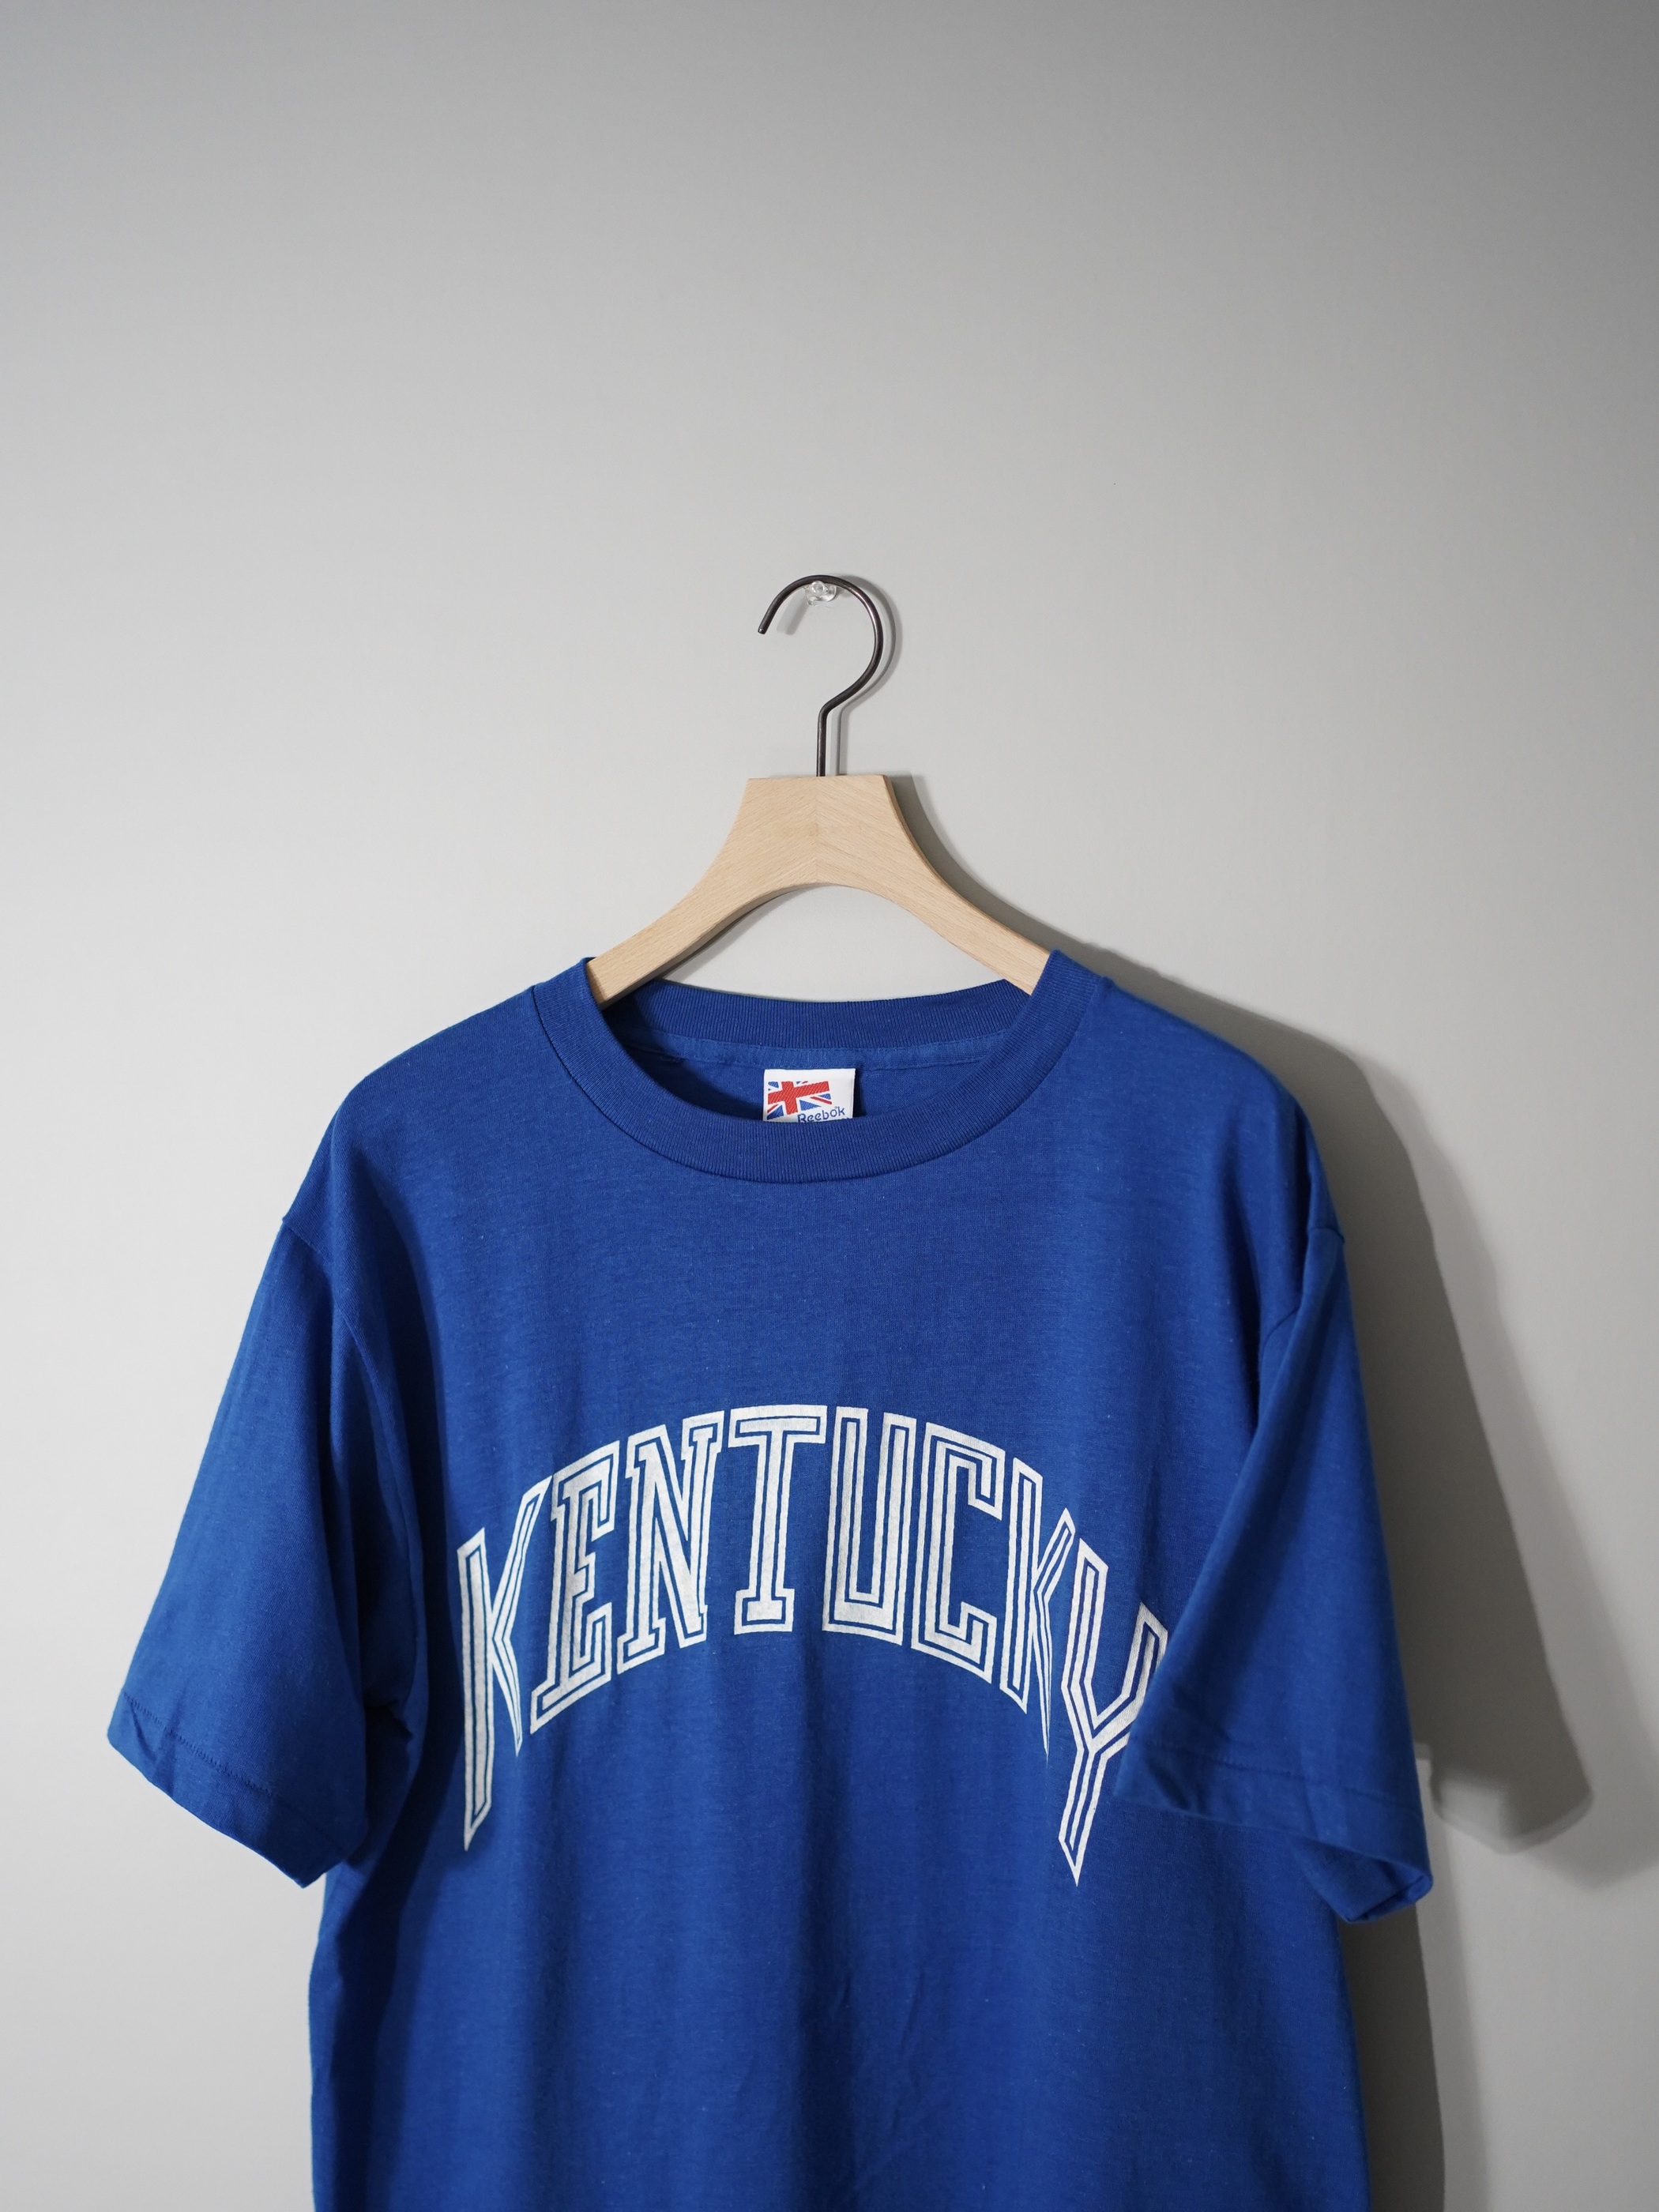 1990's Reebok College t-shirt / Made in USA